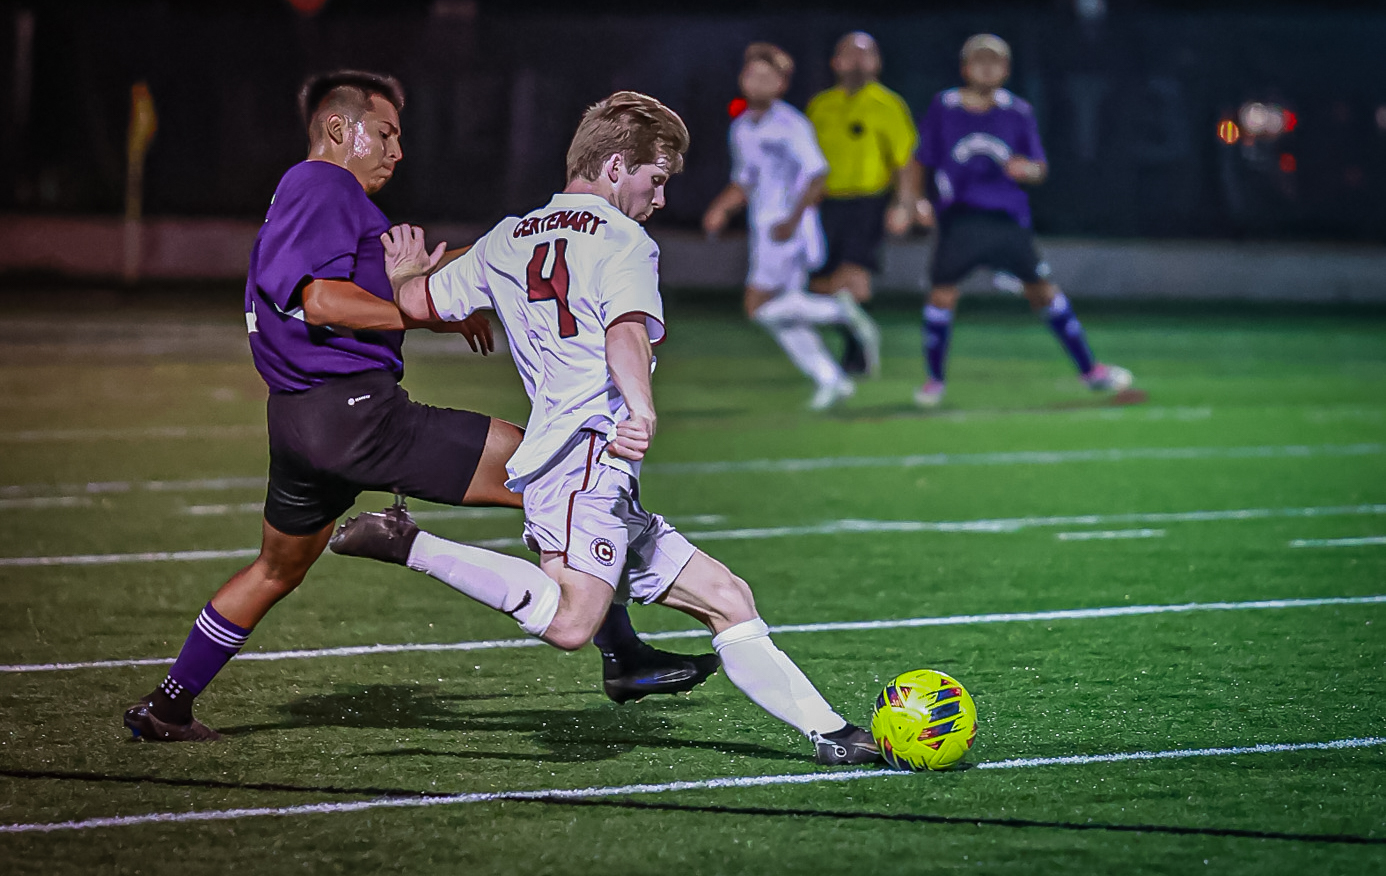 Junior MF Brennan Amato had the assist on Centenary's first goal on Thursday. 

PHOTO: Isabell Gonzales, Centenary Student Photographer